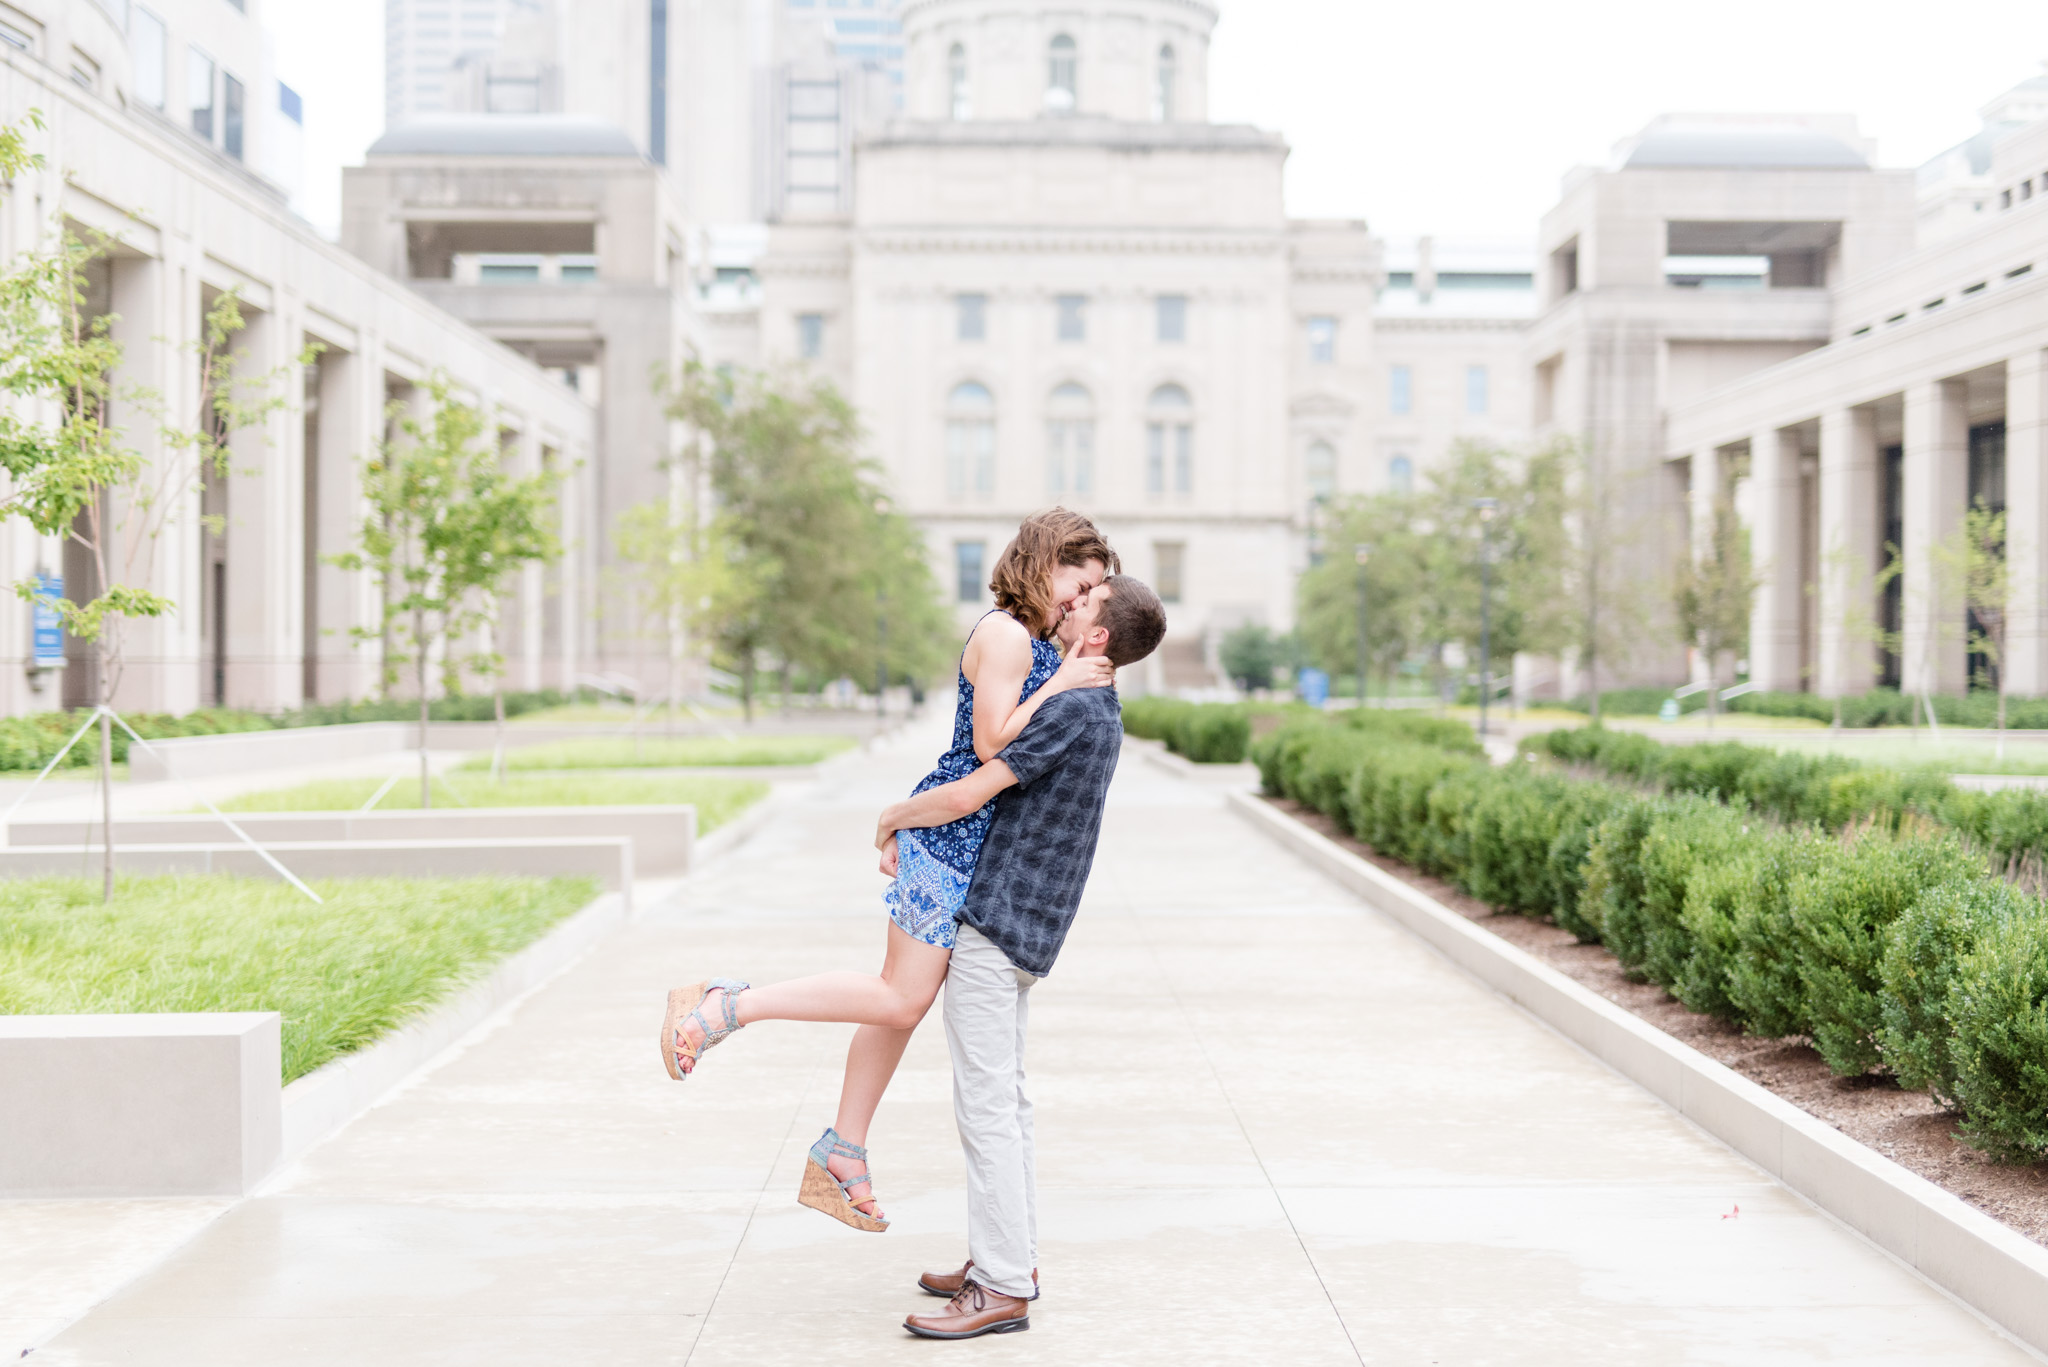 Planning Your Hair and Makeup | Tips for Gorgeous Engagement Photos